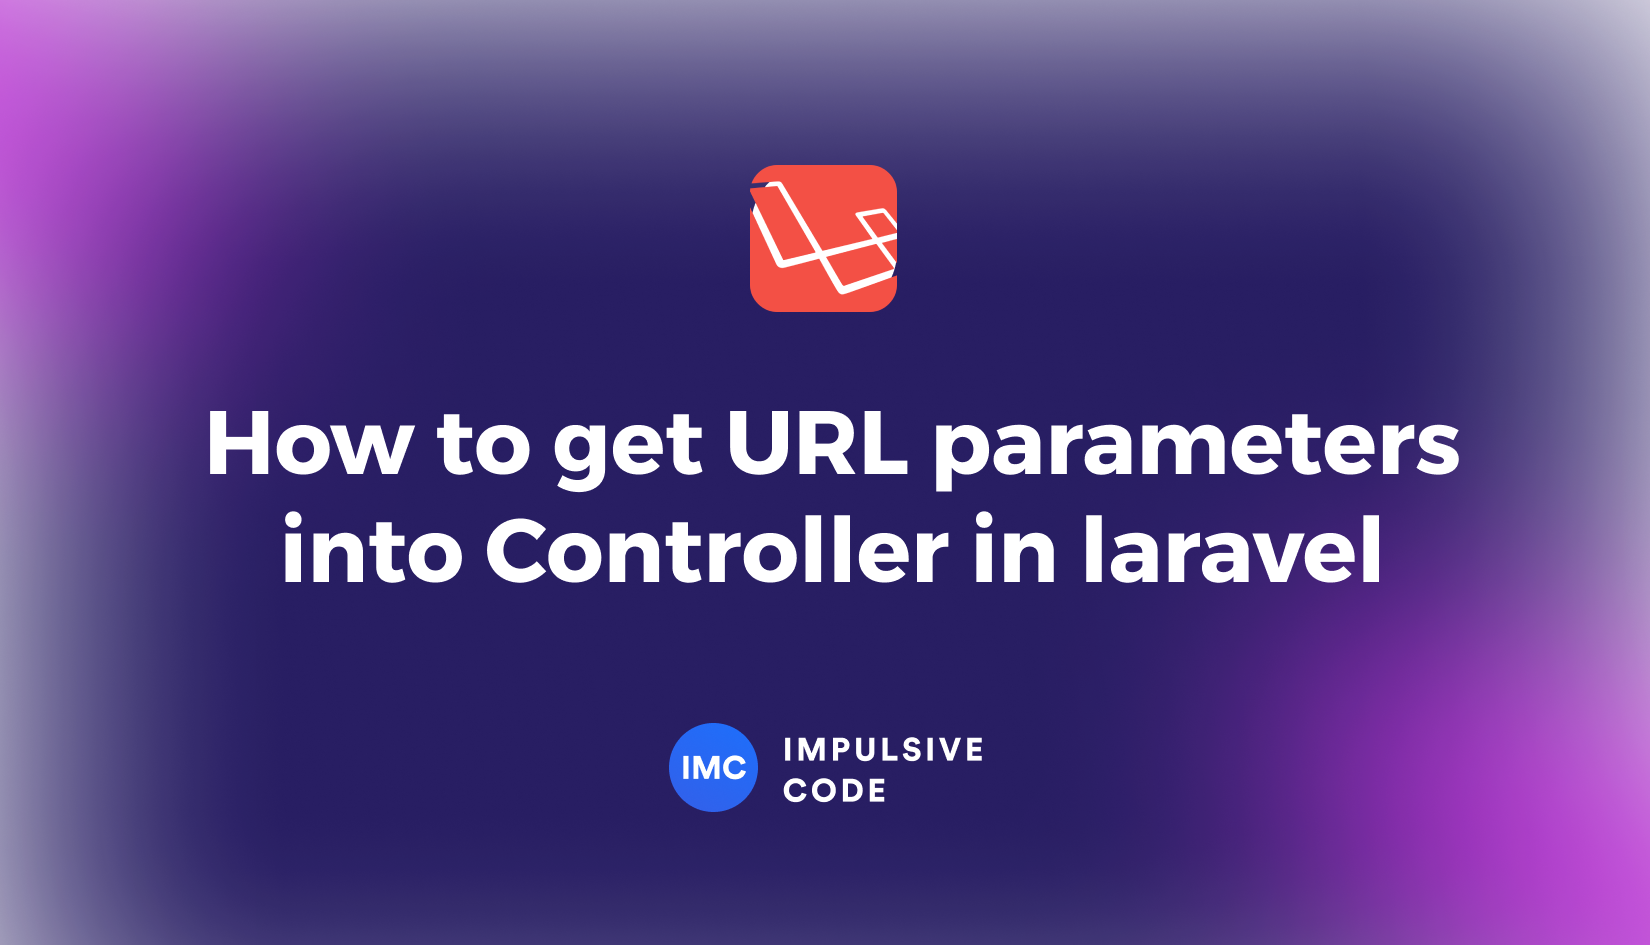 How to get URL parameters into Controller in laravel